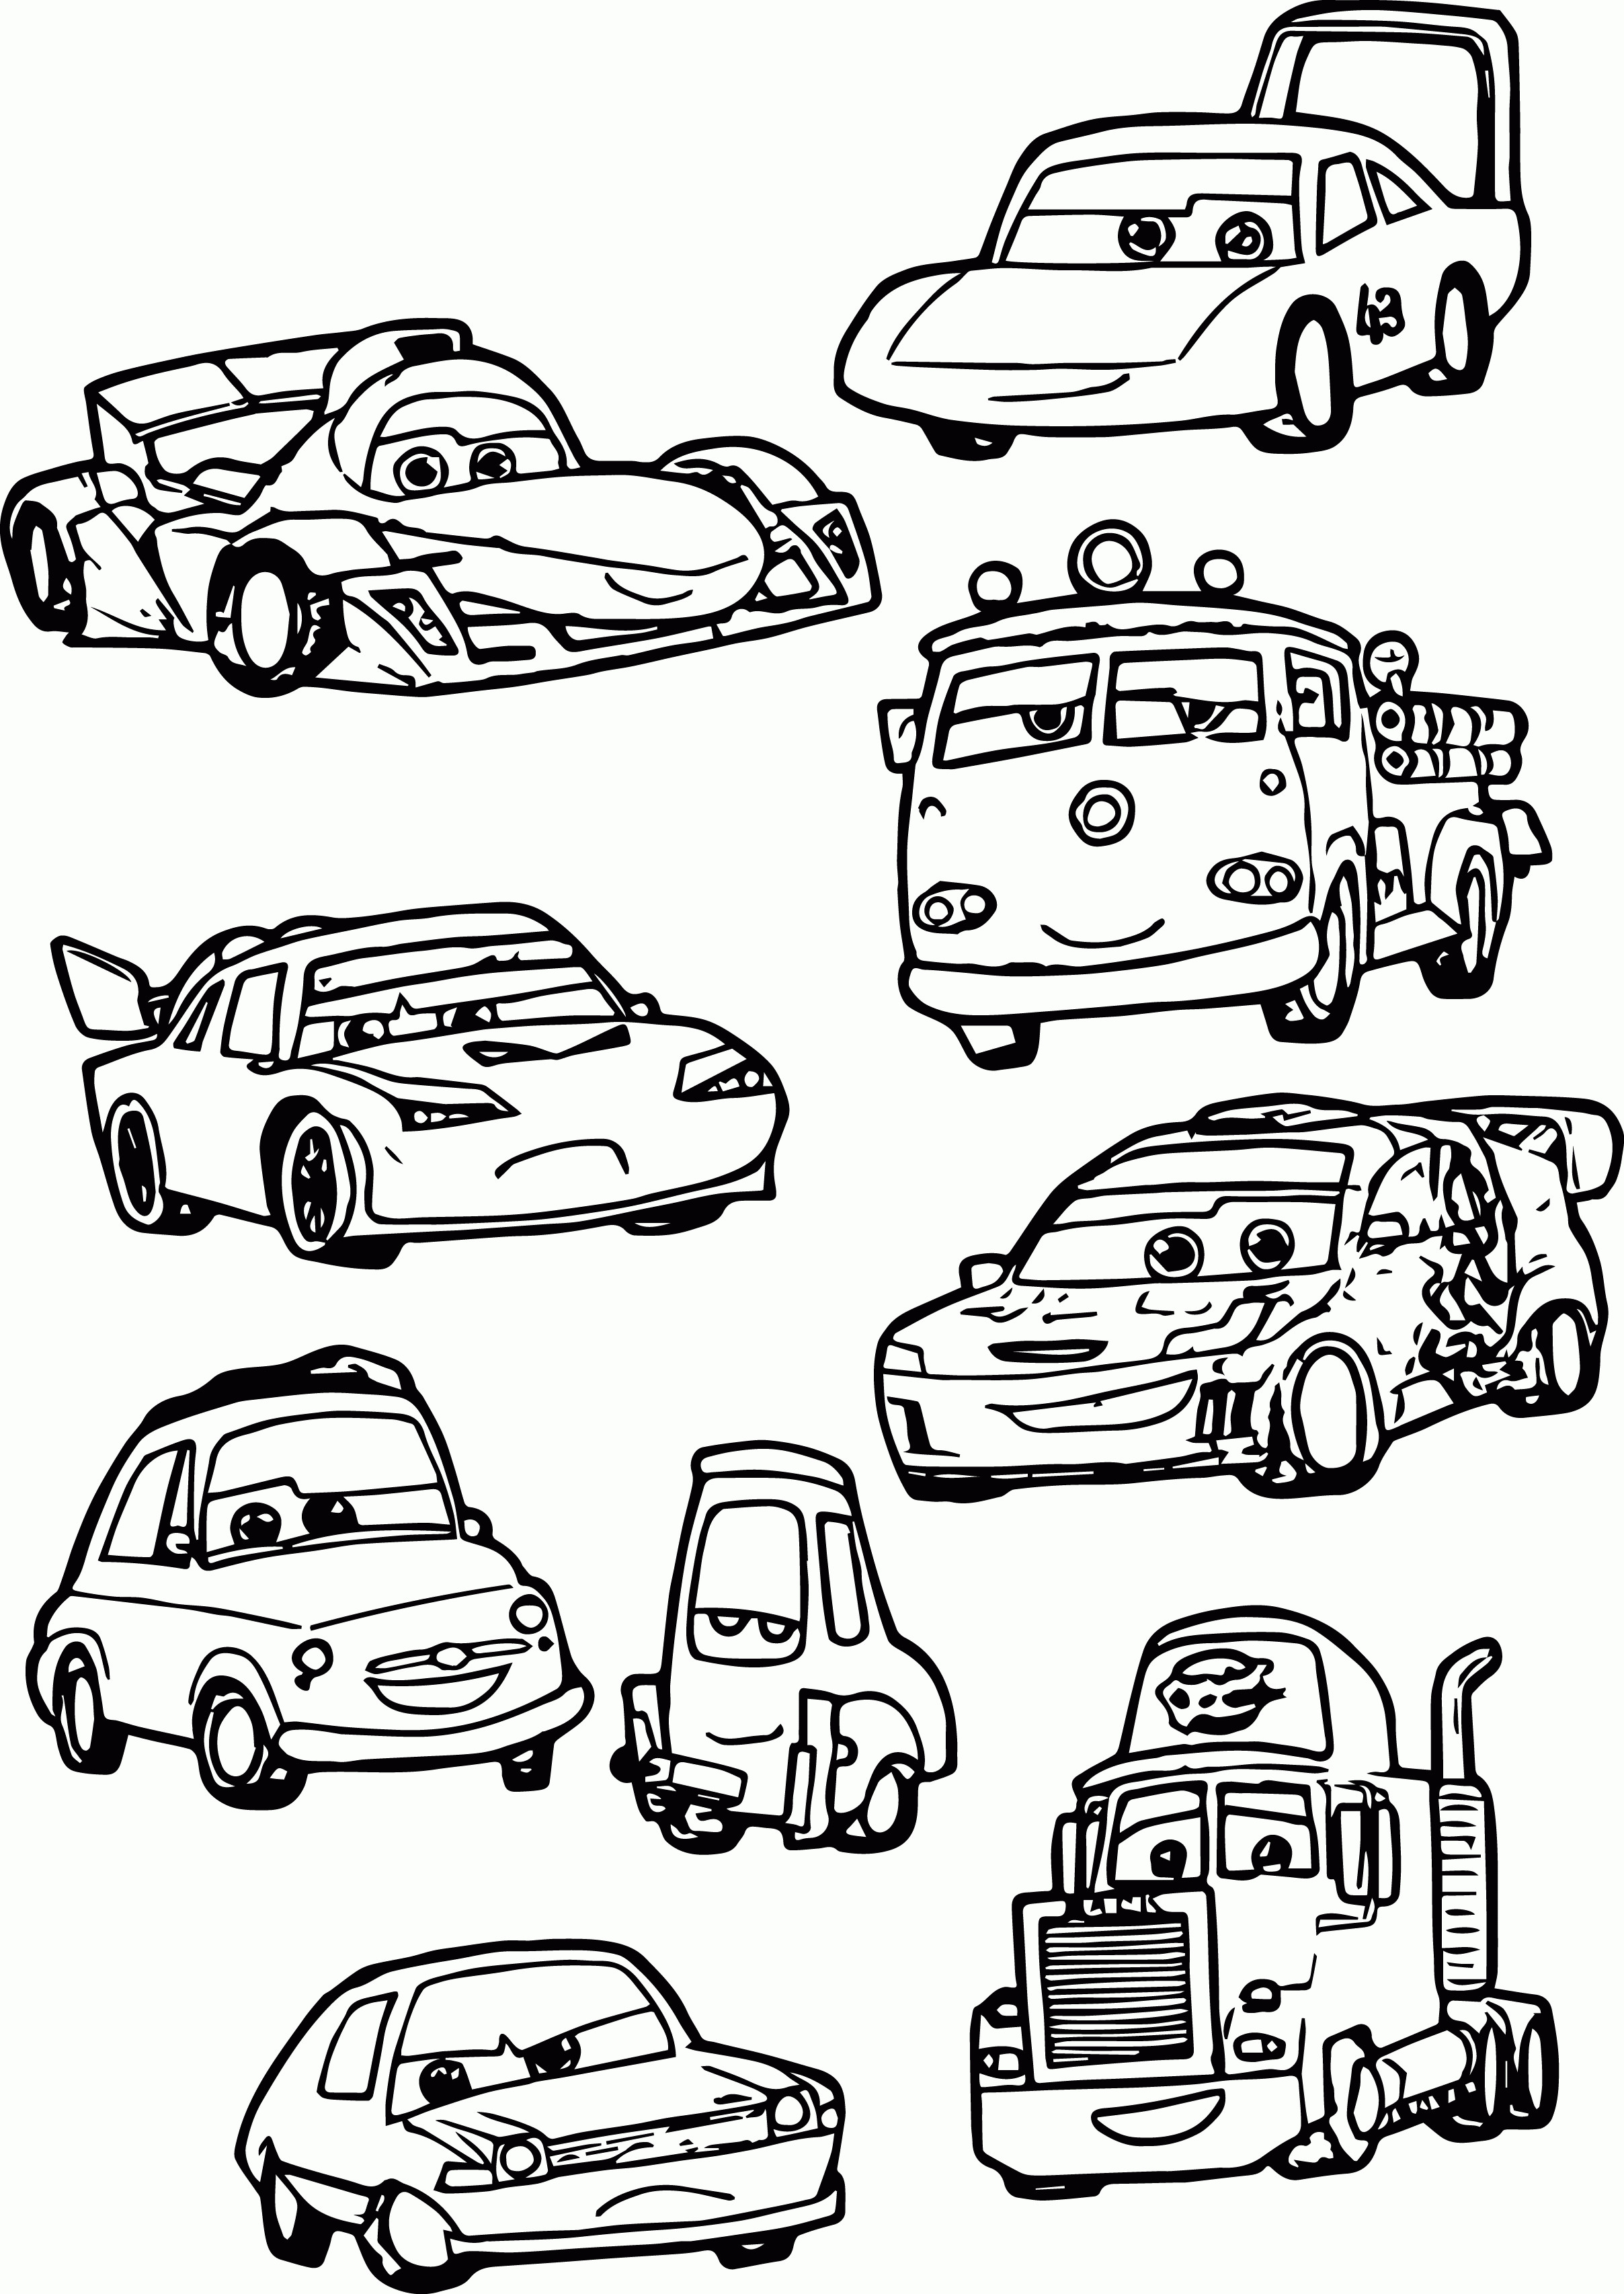 Cars 2 Free Coloring Pages
 Mcqueen Cars 2 Coloring Pages Coloring Home